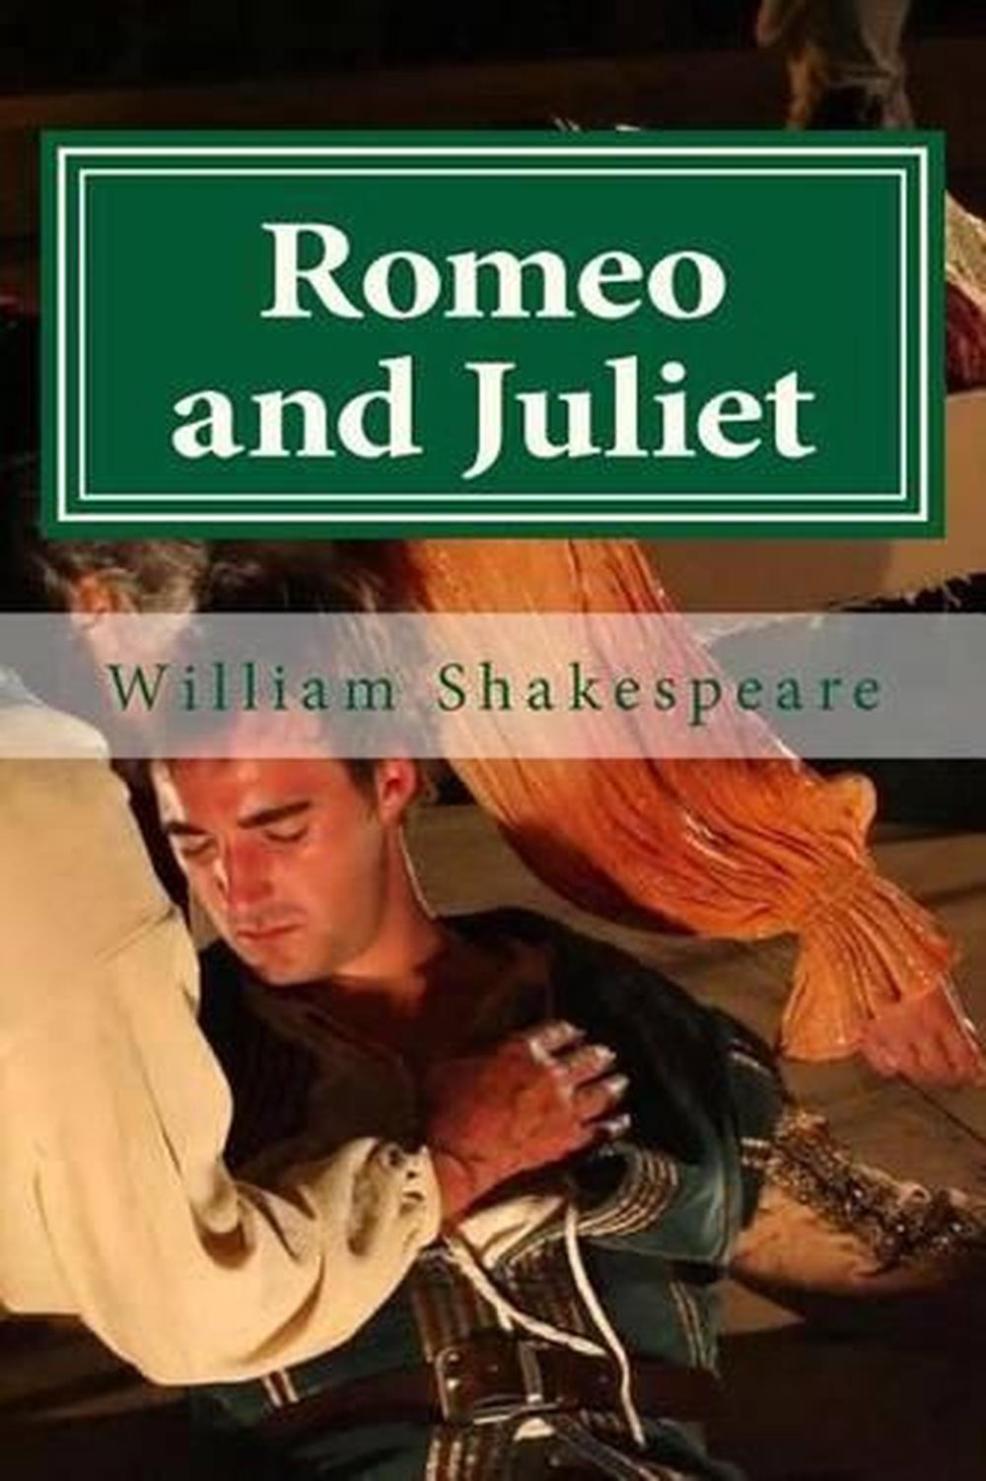 What are the Major Themes Explored in Romeo and Juliet?